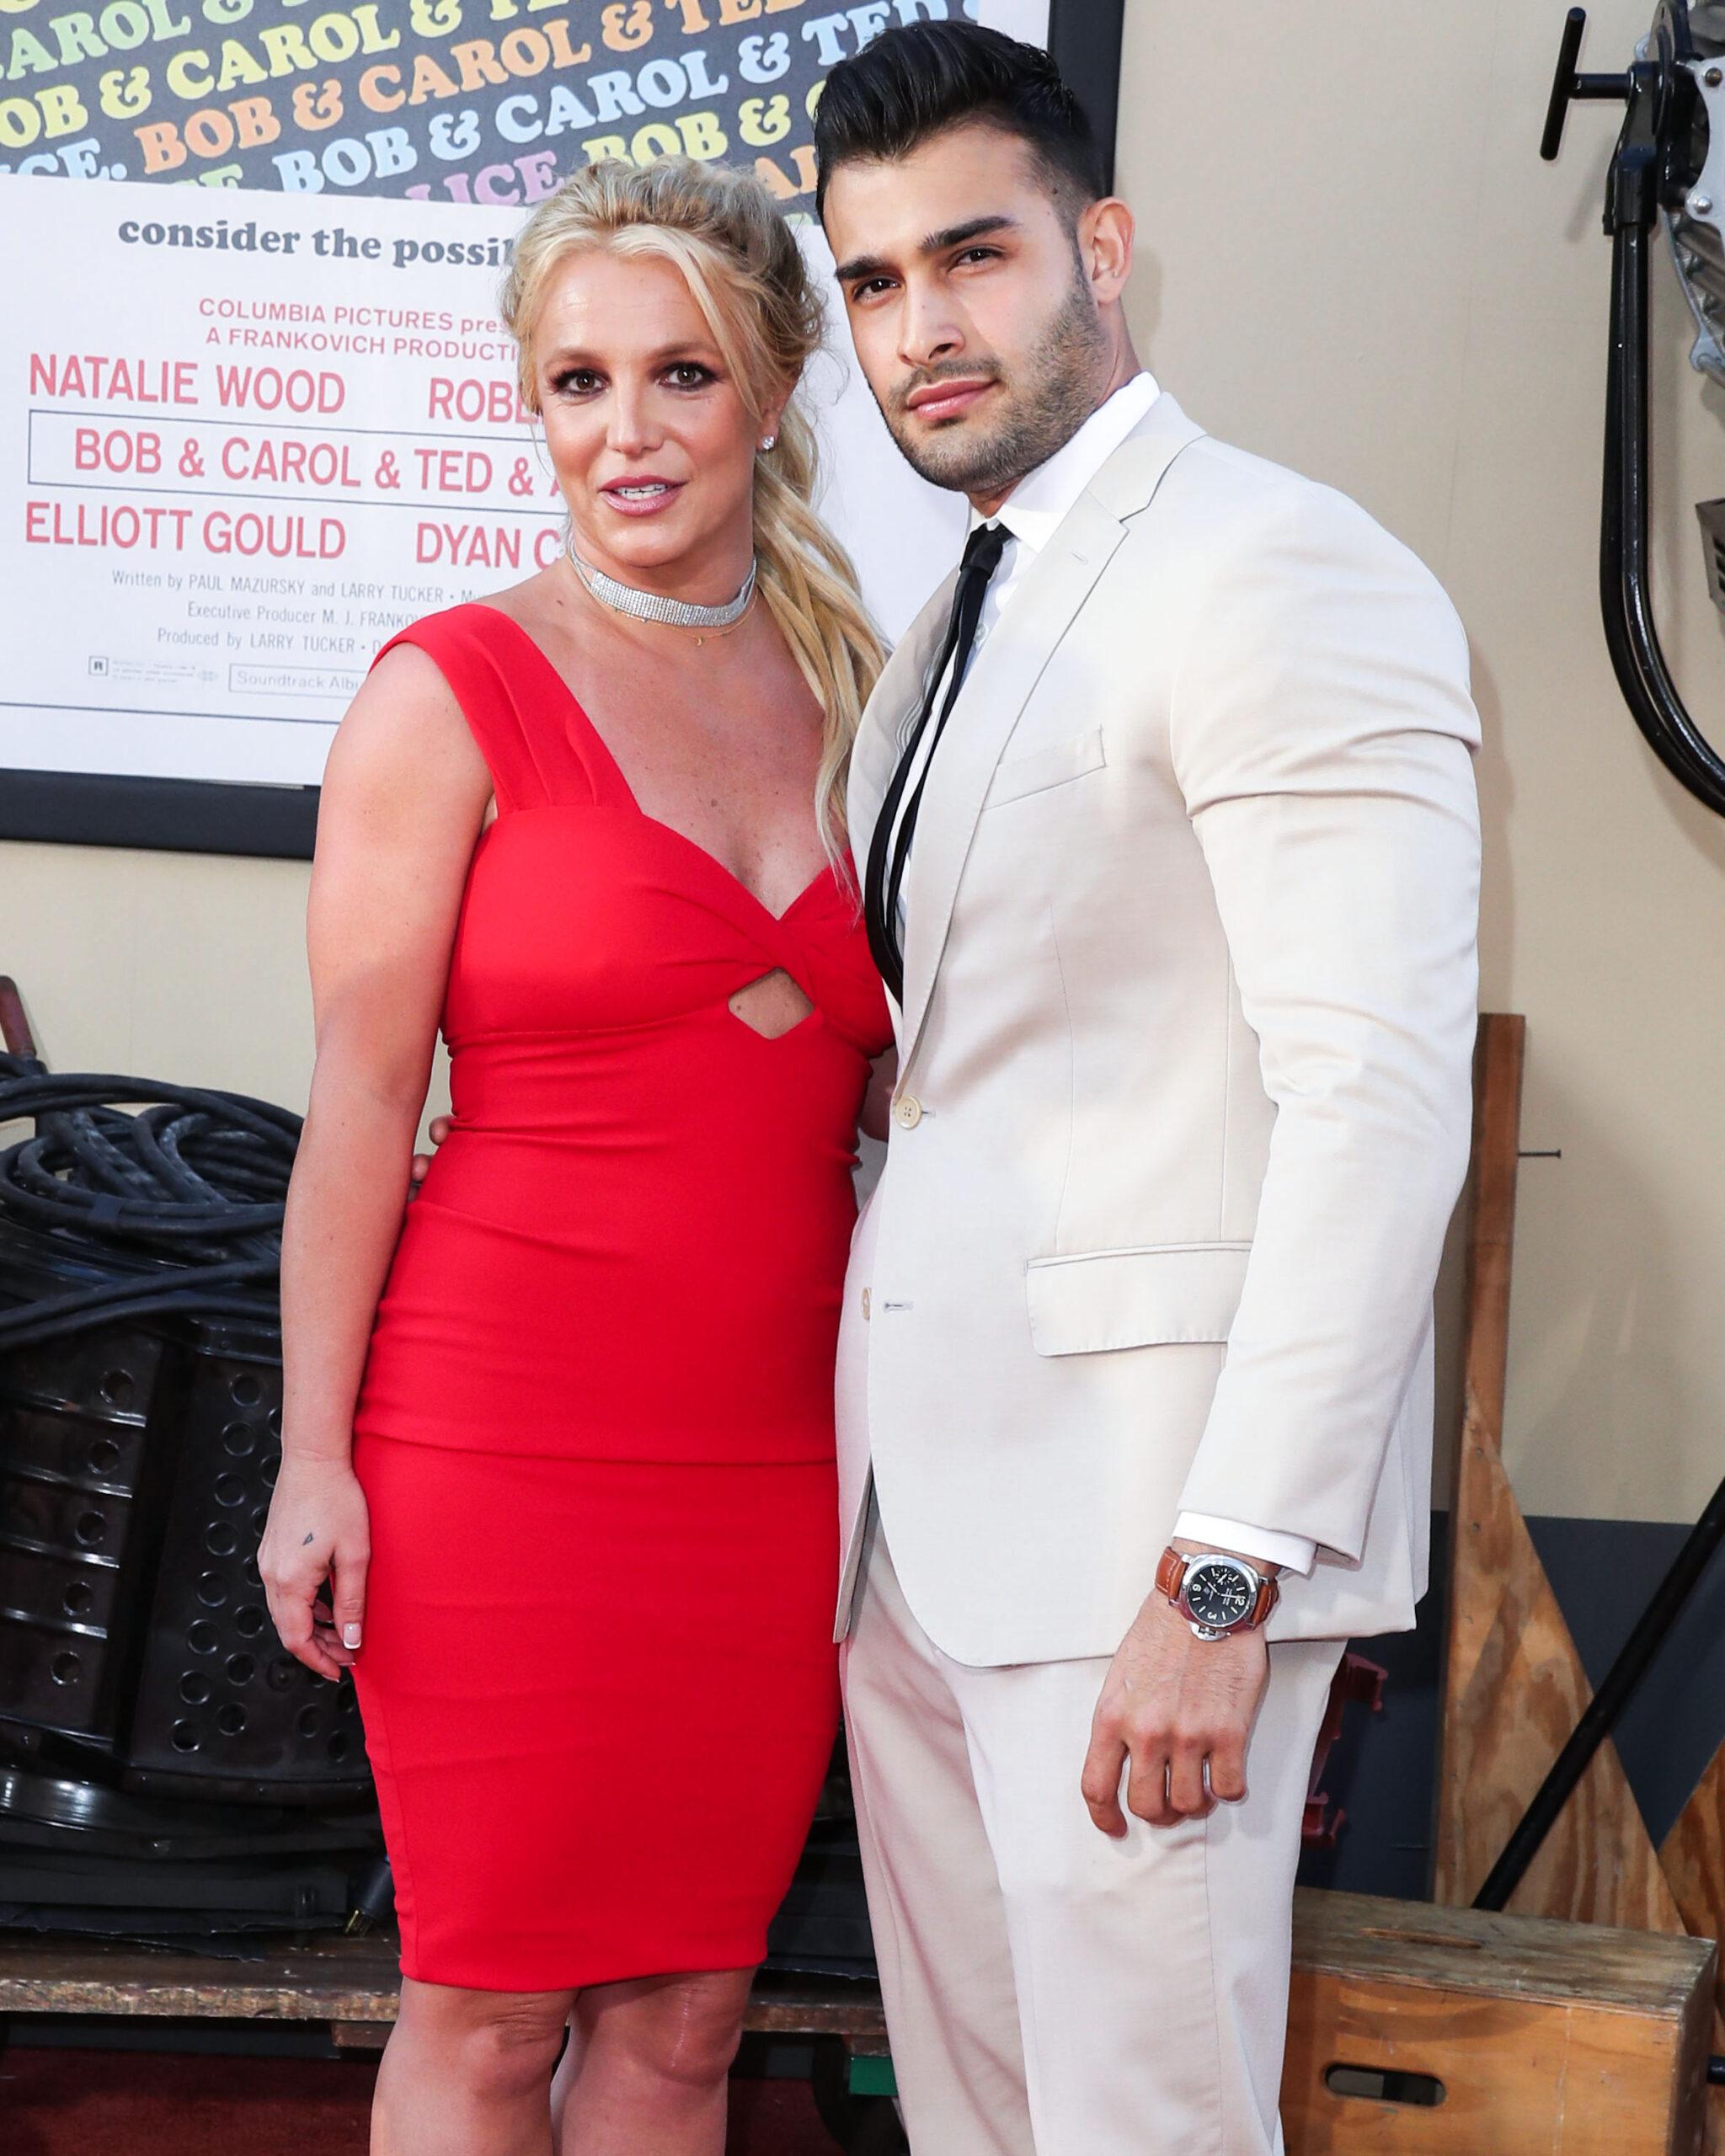 Britney Spears’ Fiancé Is A ‘Great Influence’ On Her Overall Health